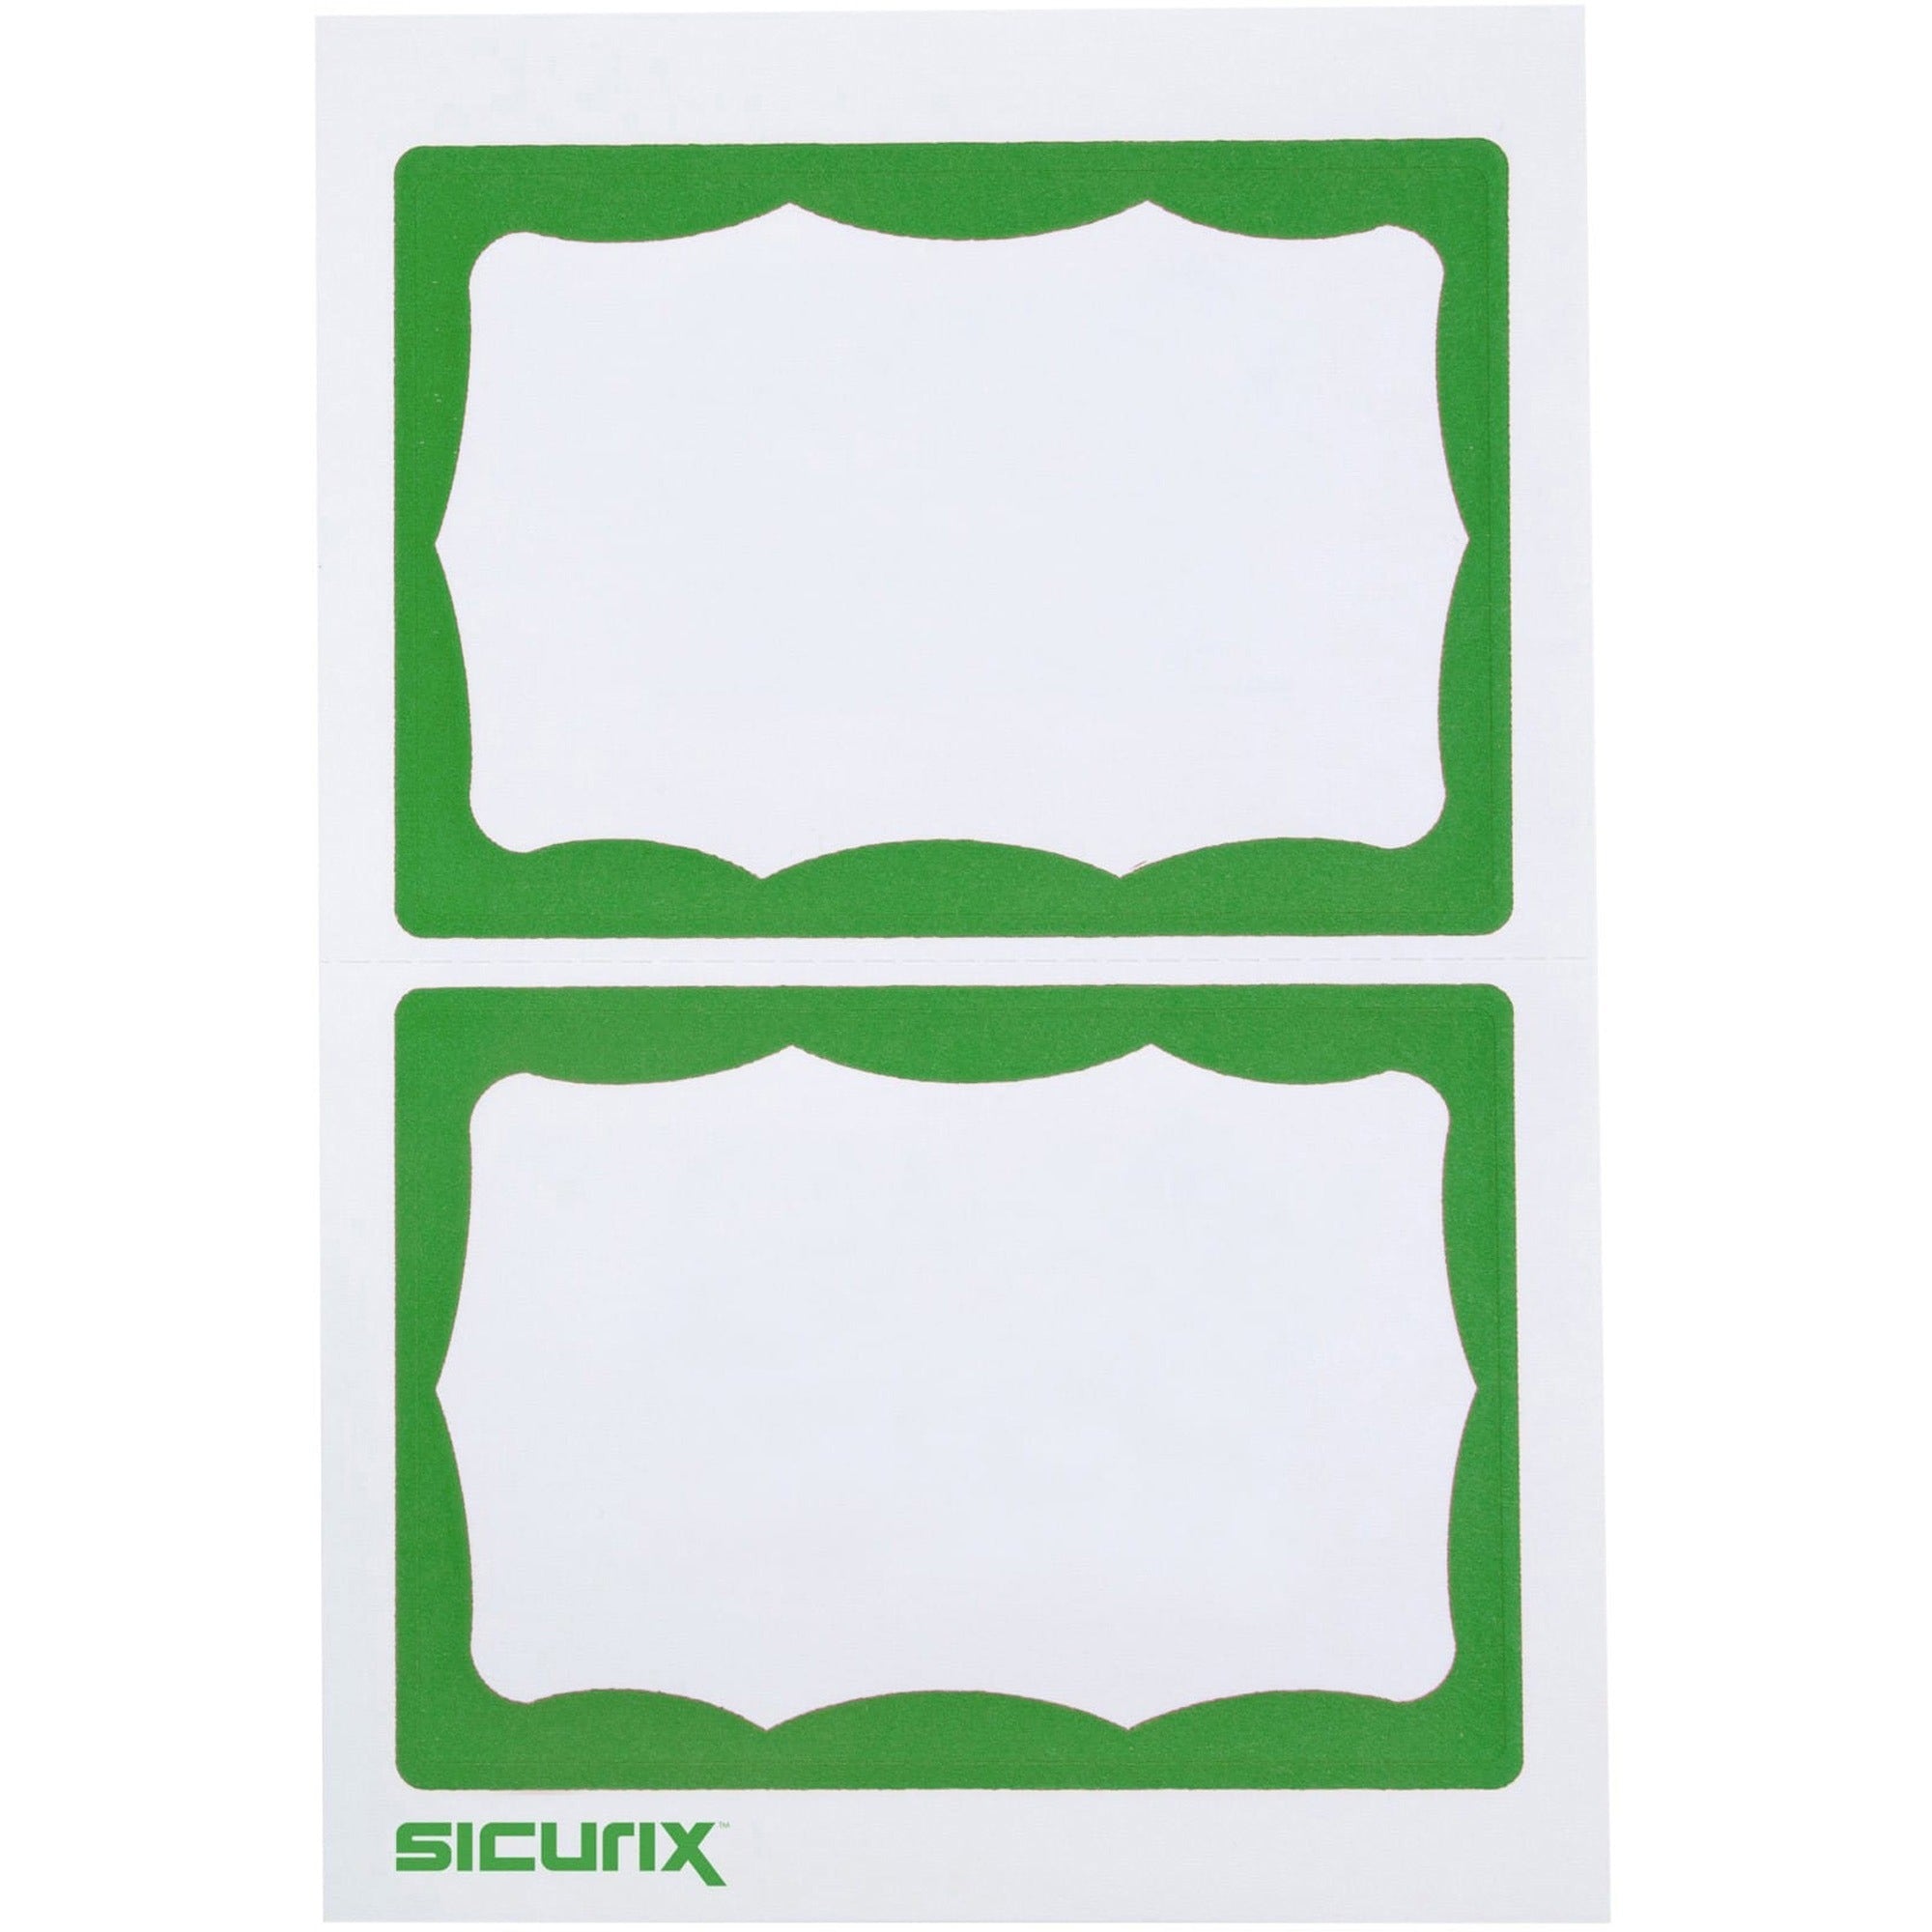 SICURIX Self-adhesive Visitor Badge - 3 1/2" Width x 2 1/4" Length - White, Green - 100 / Box - Self-adhesive, Removable, Easy Peel - 